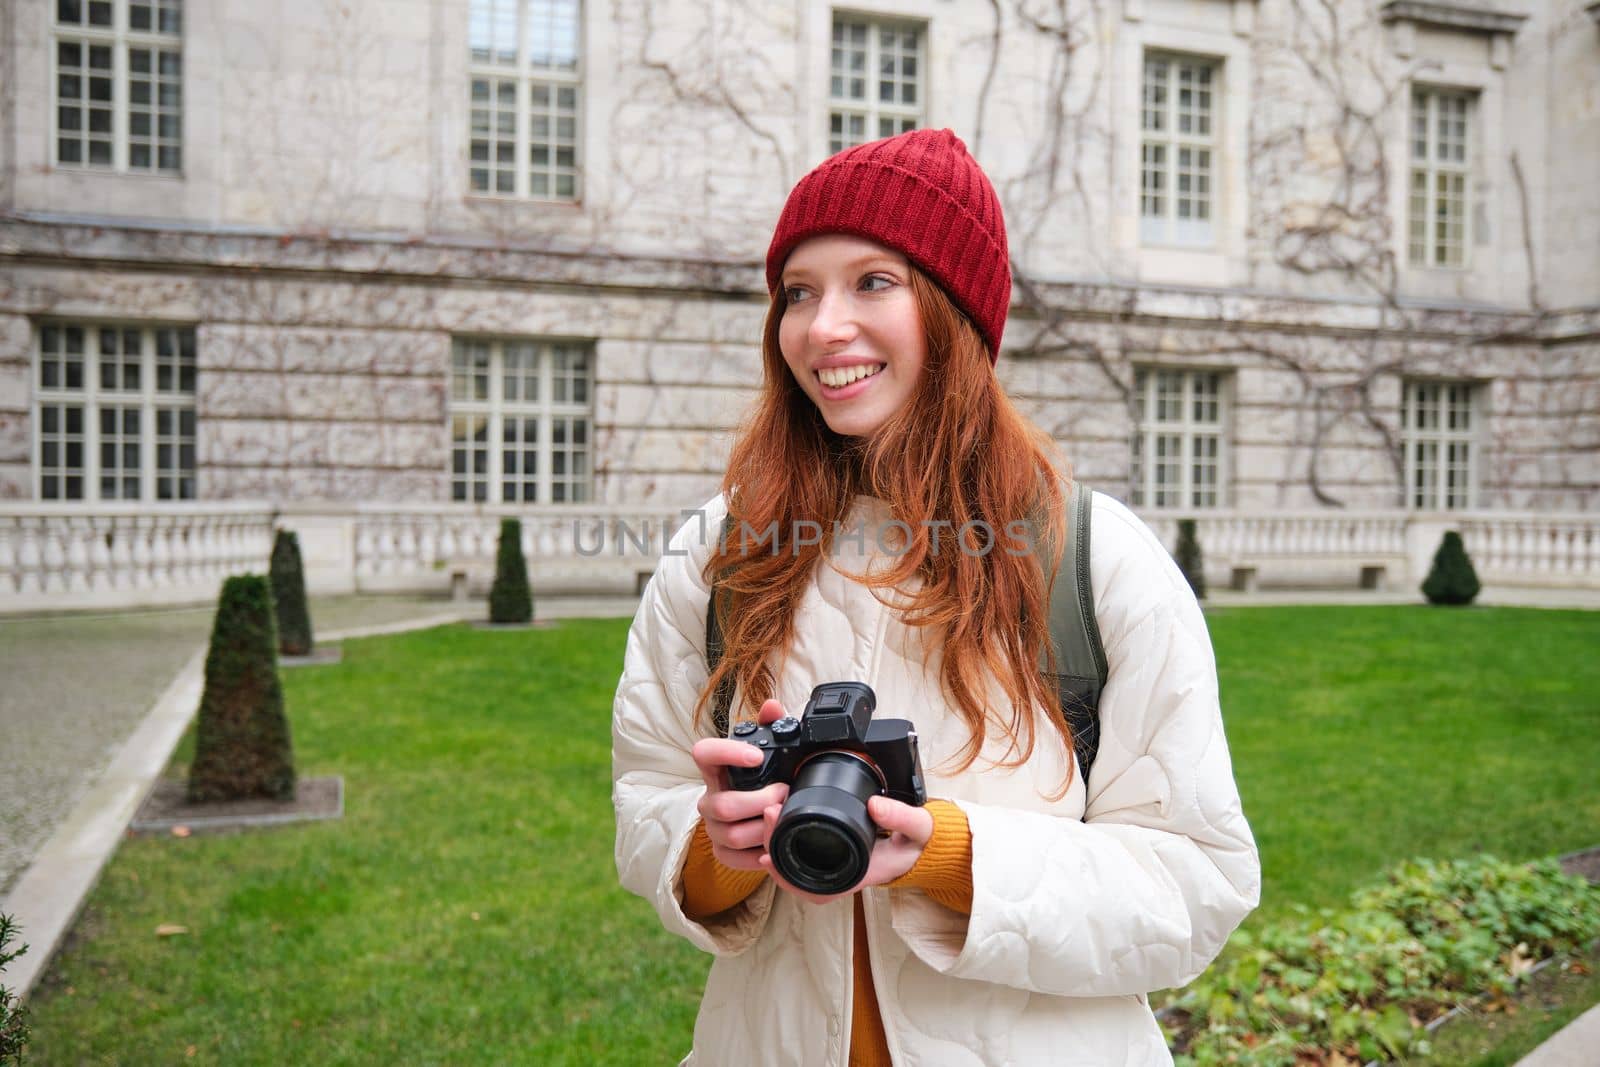 Redhead girl photographer takes photos on professional camera outdoors, captures streetstyle shots, looks excited while taking pictures.